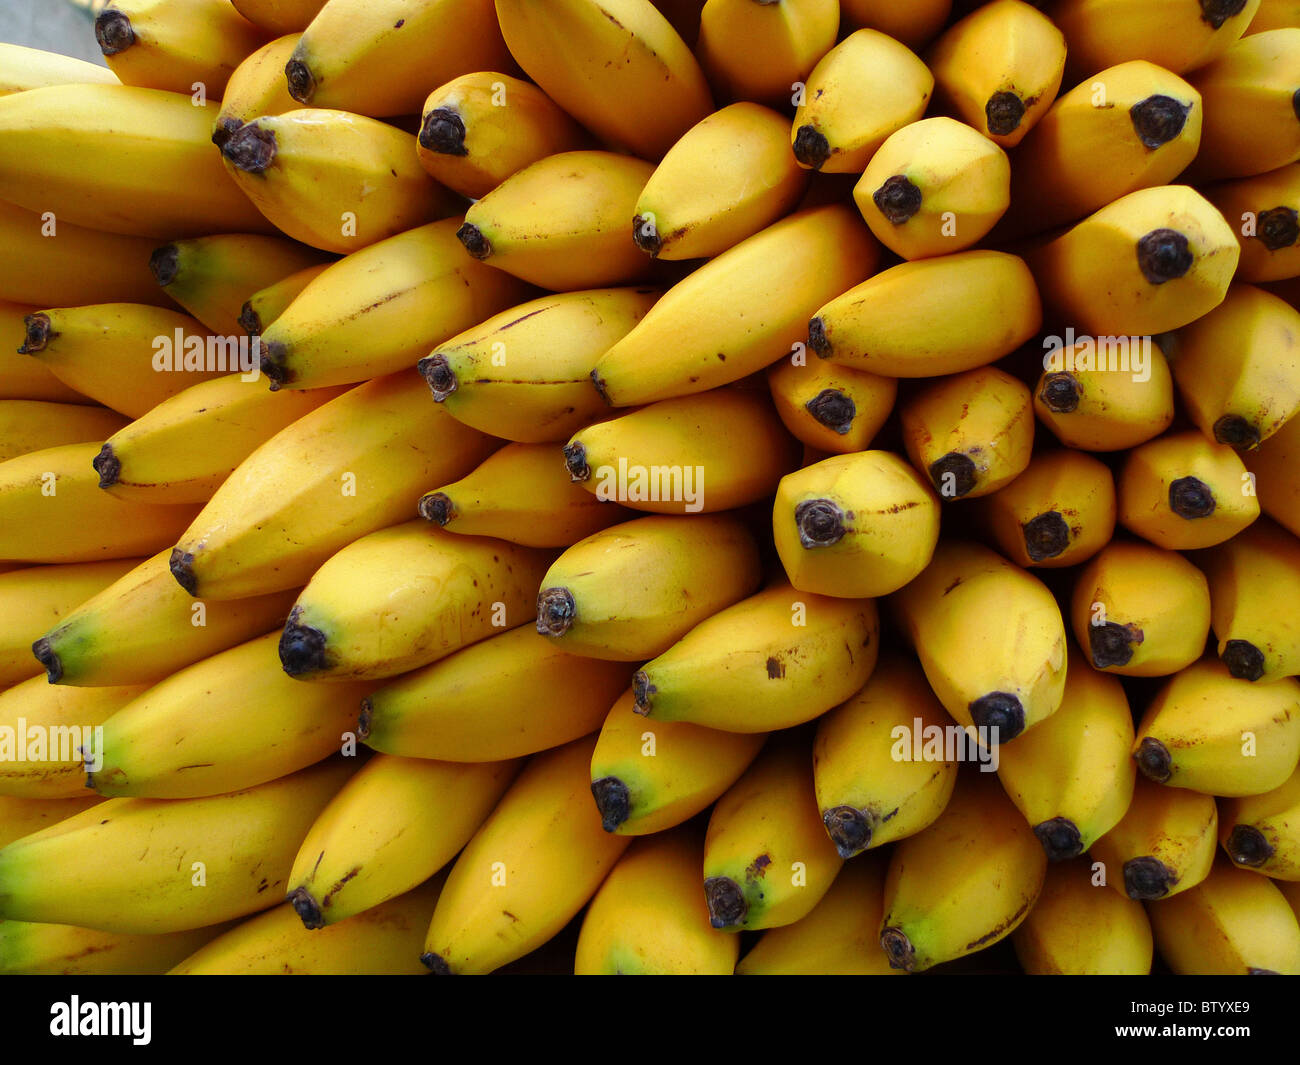 https://c8.alamy.com/comp/BTYXE9/a-large-bunch-of-bananas-BTYXE9.jpg